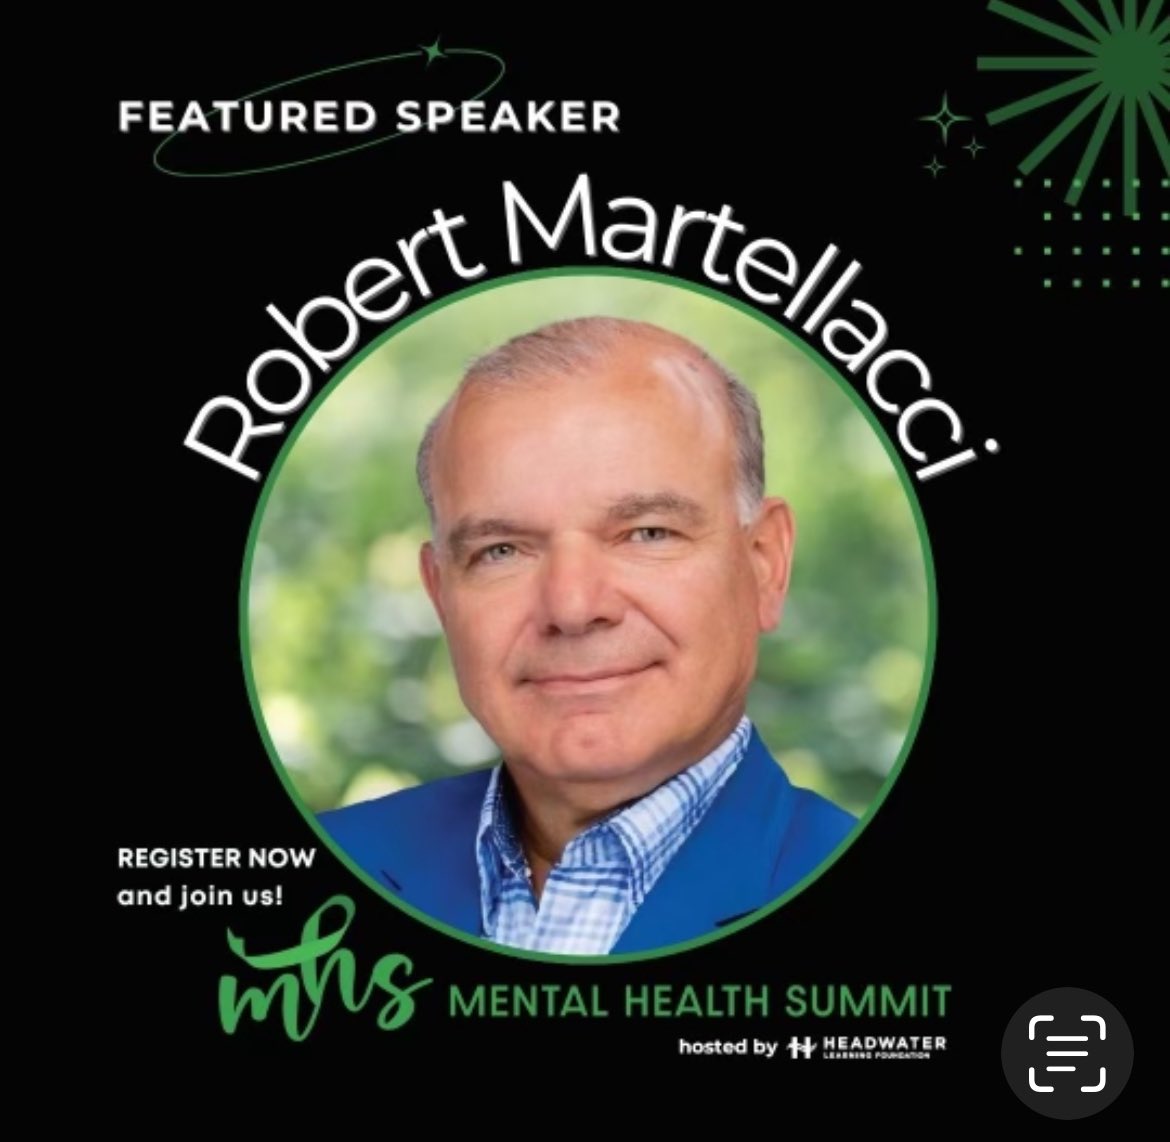 Excited to hear Robert Martellacci at the Canadian Mental Health Summit present “Empowering Tomorrows Leaders: Social Emotional Learning for Enhanced Mental Health with a C21 Lens” @C21Can @MindShareK12 @MindShareLearn @tdsb @PeelSchools @C21CEO Tickets at mentalhealthinschoolsummit.com